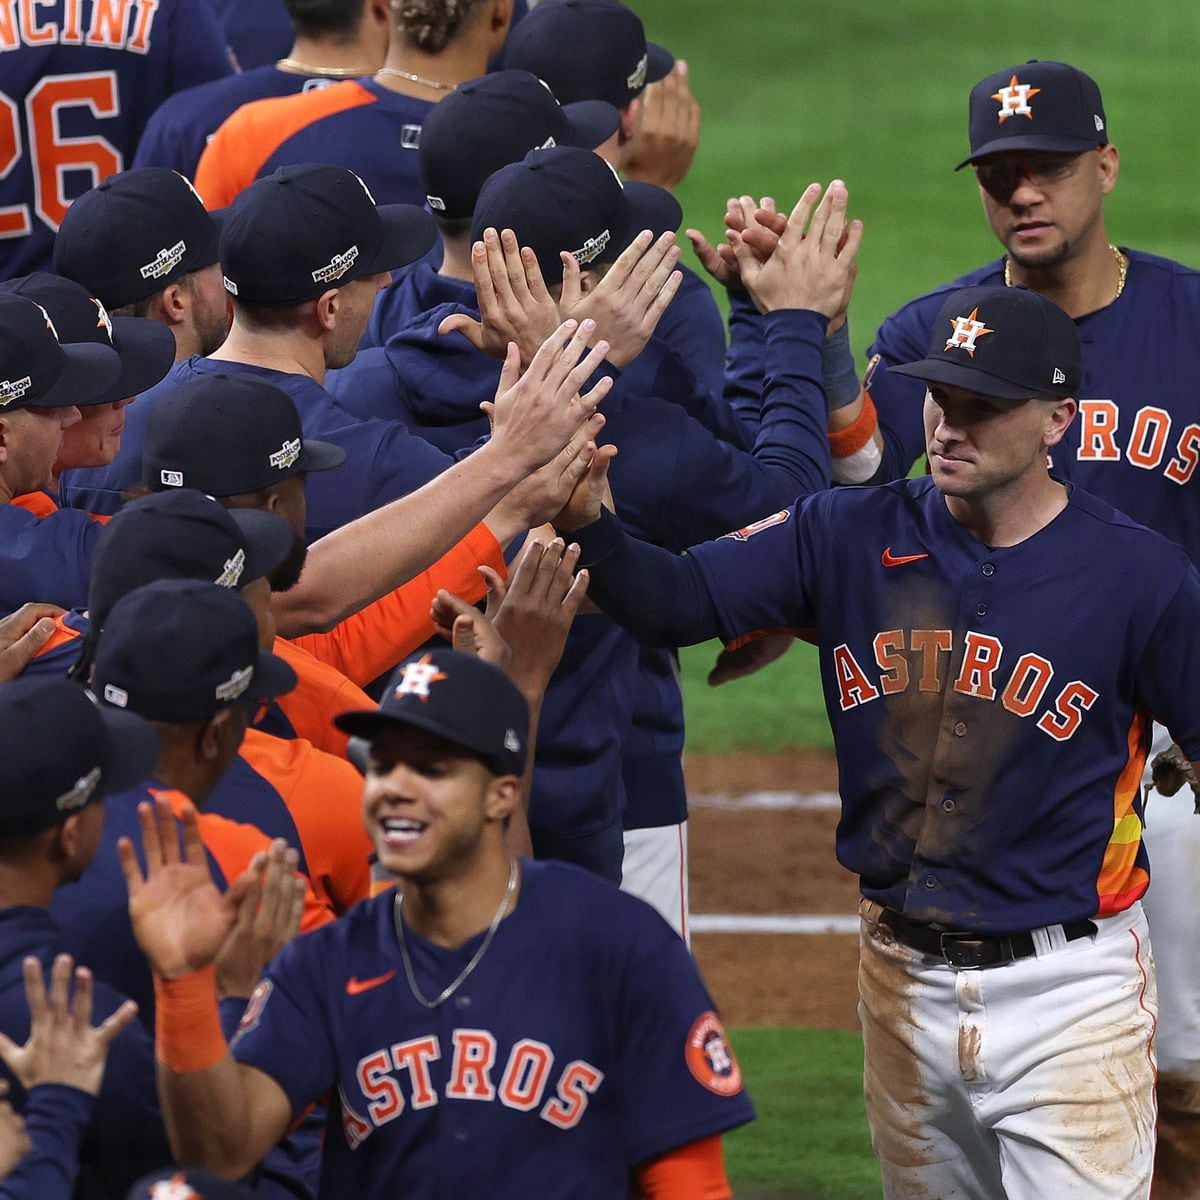 Highlights from the Astros' World Series Game 2 win over the Dodgers 